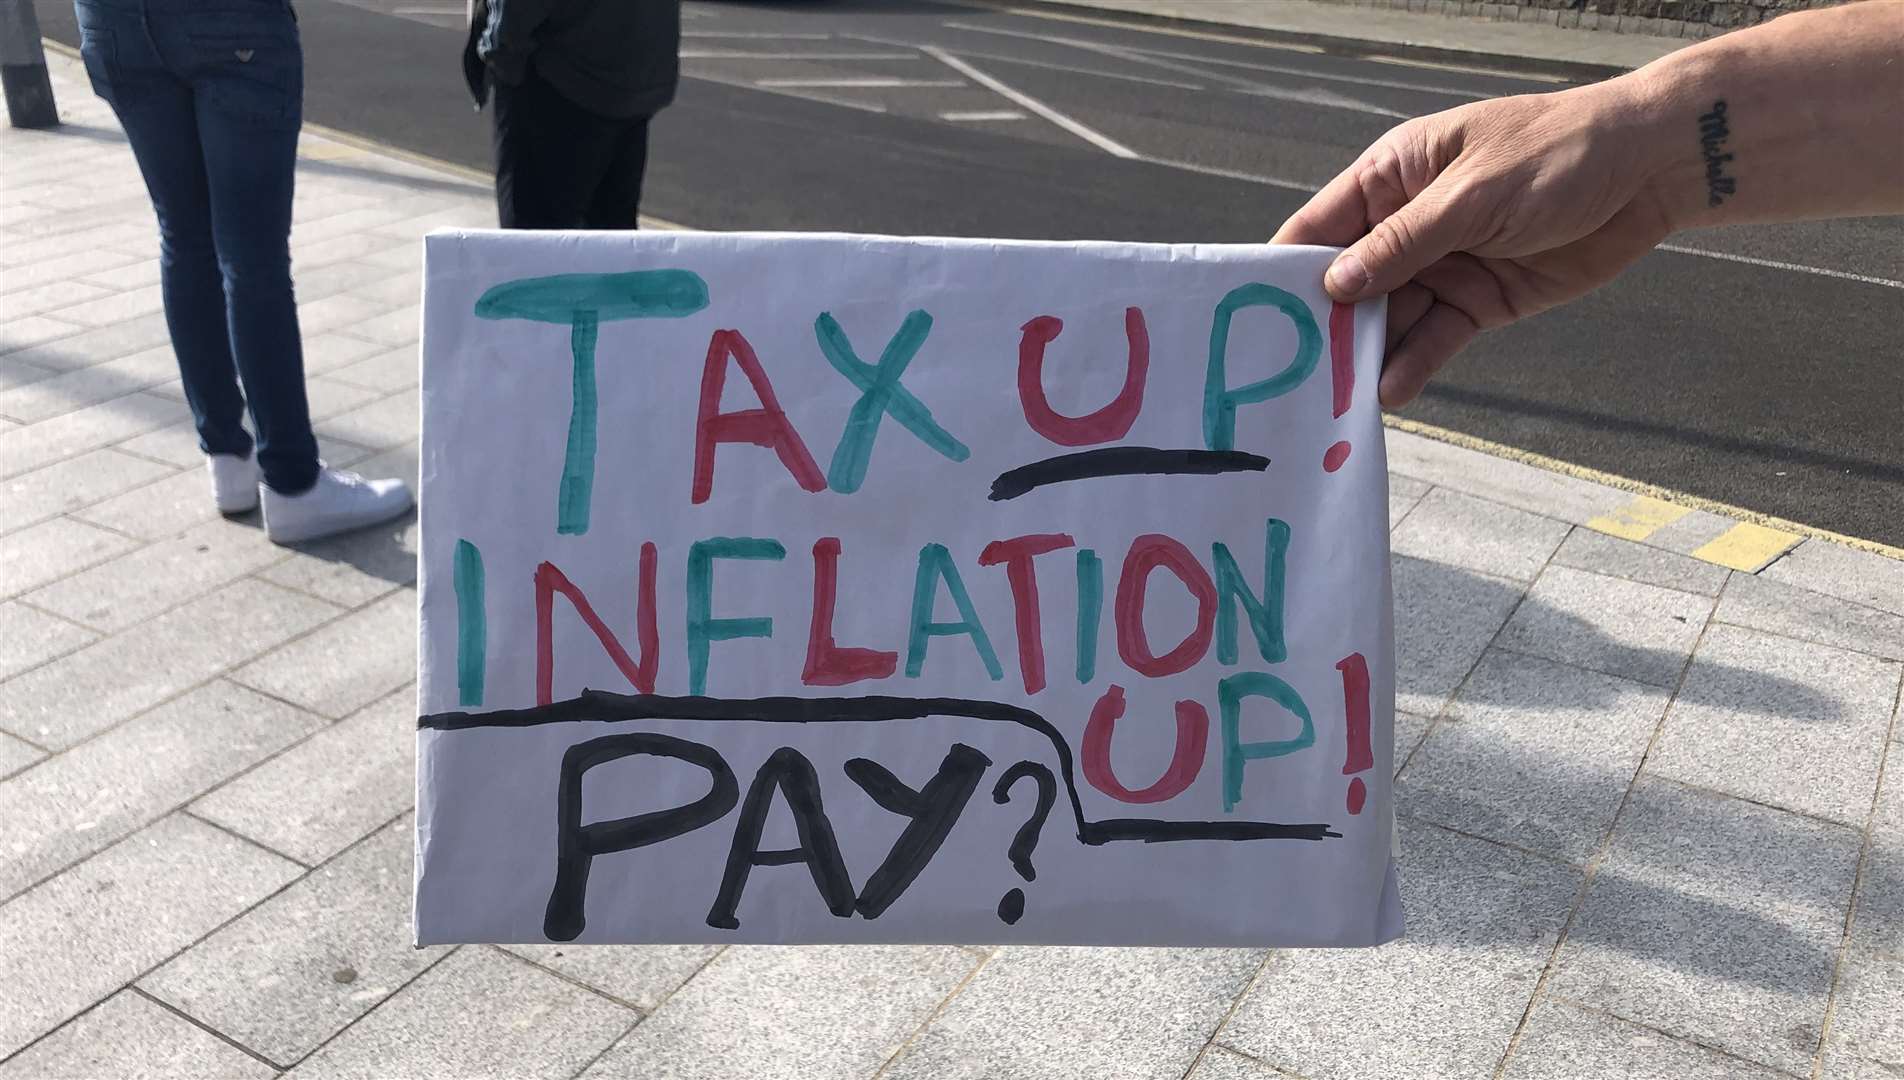 Workers in numerous sectors are demanding better pay as inflation rockets